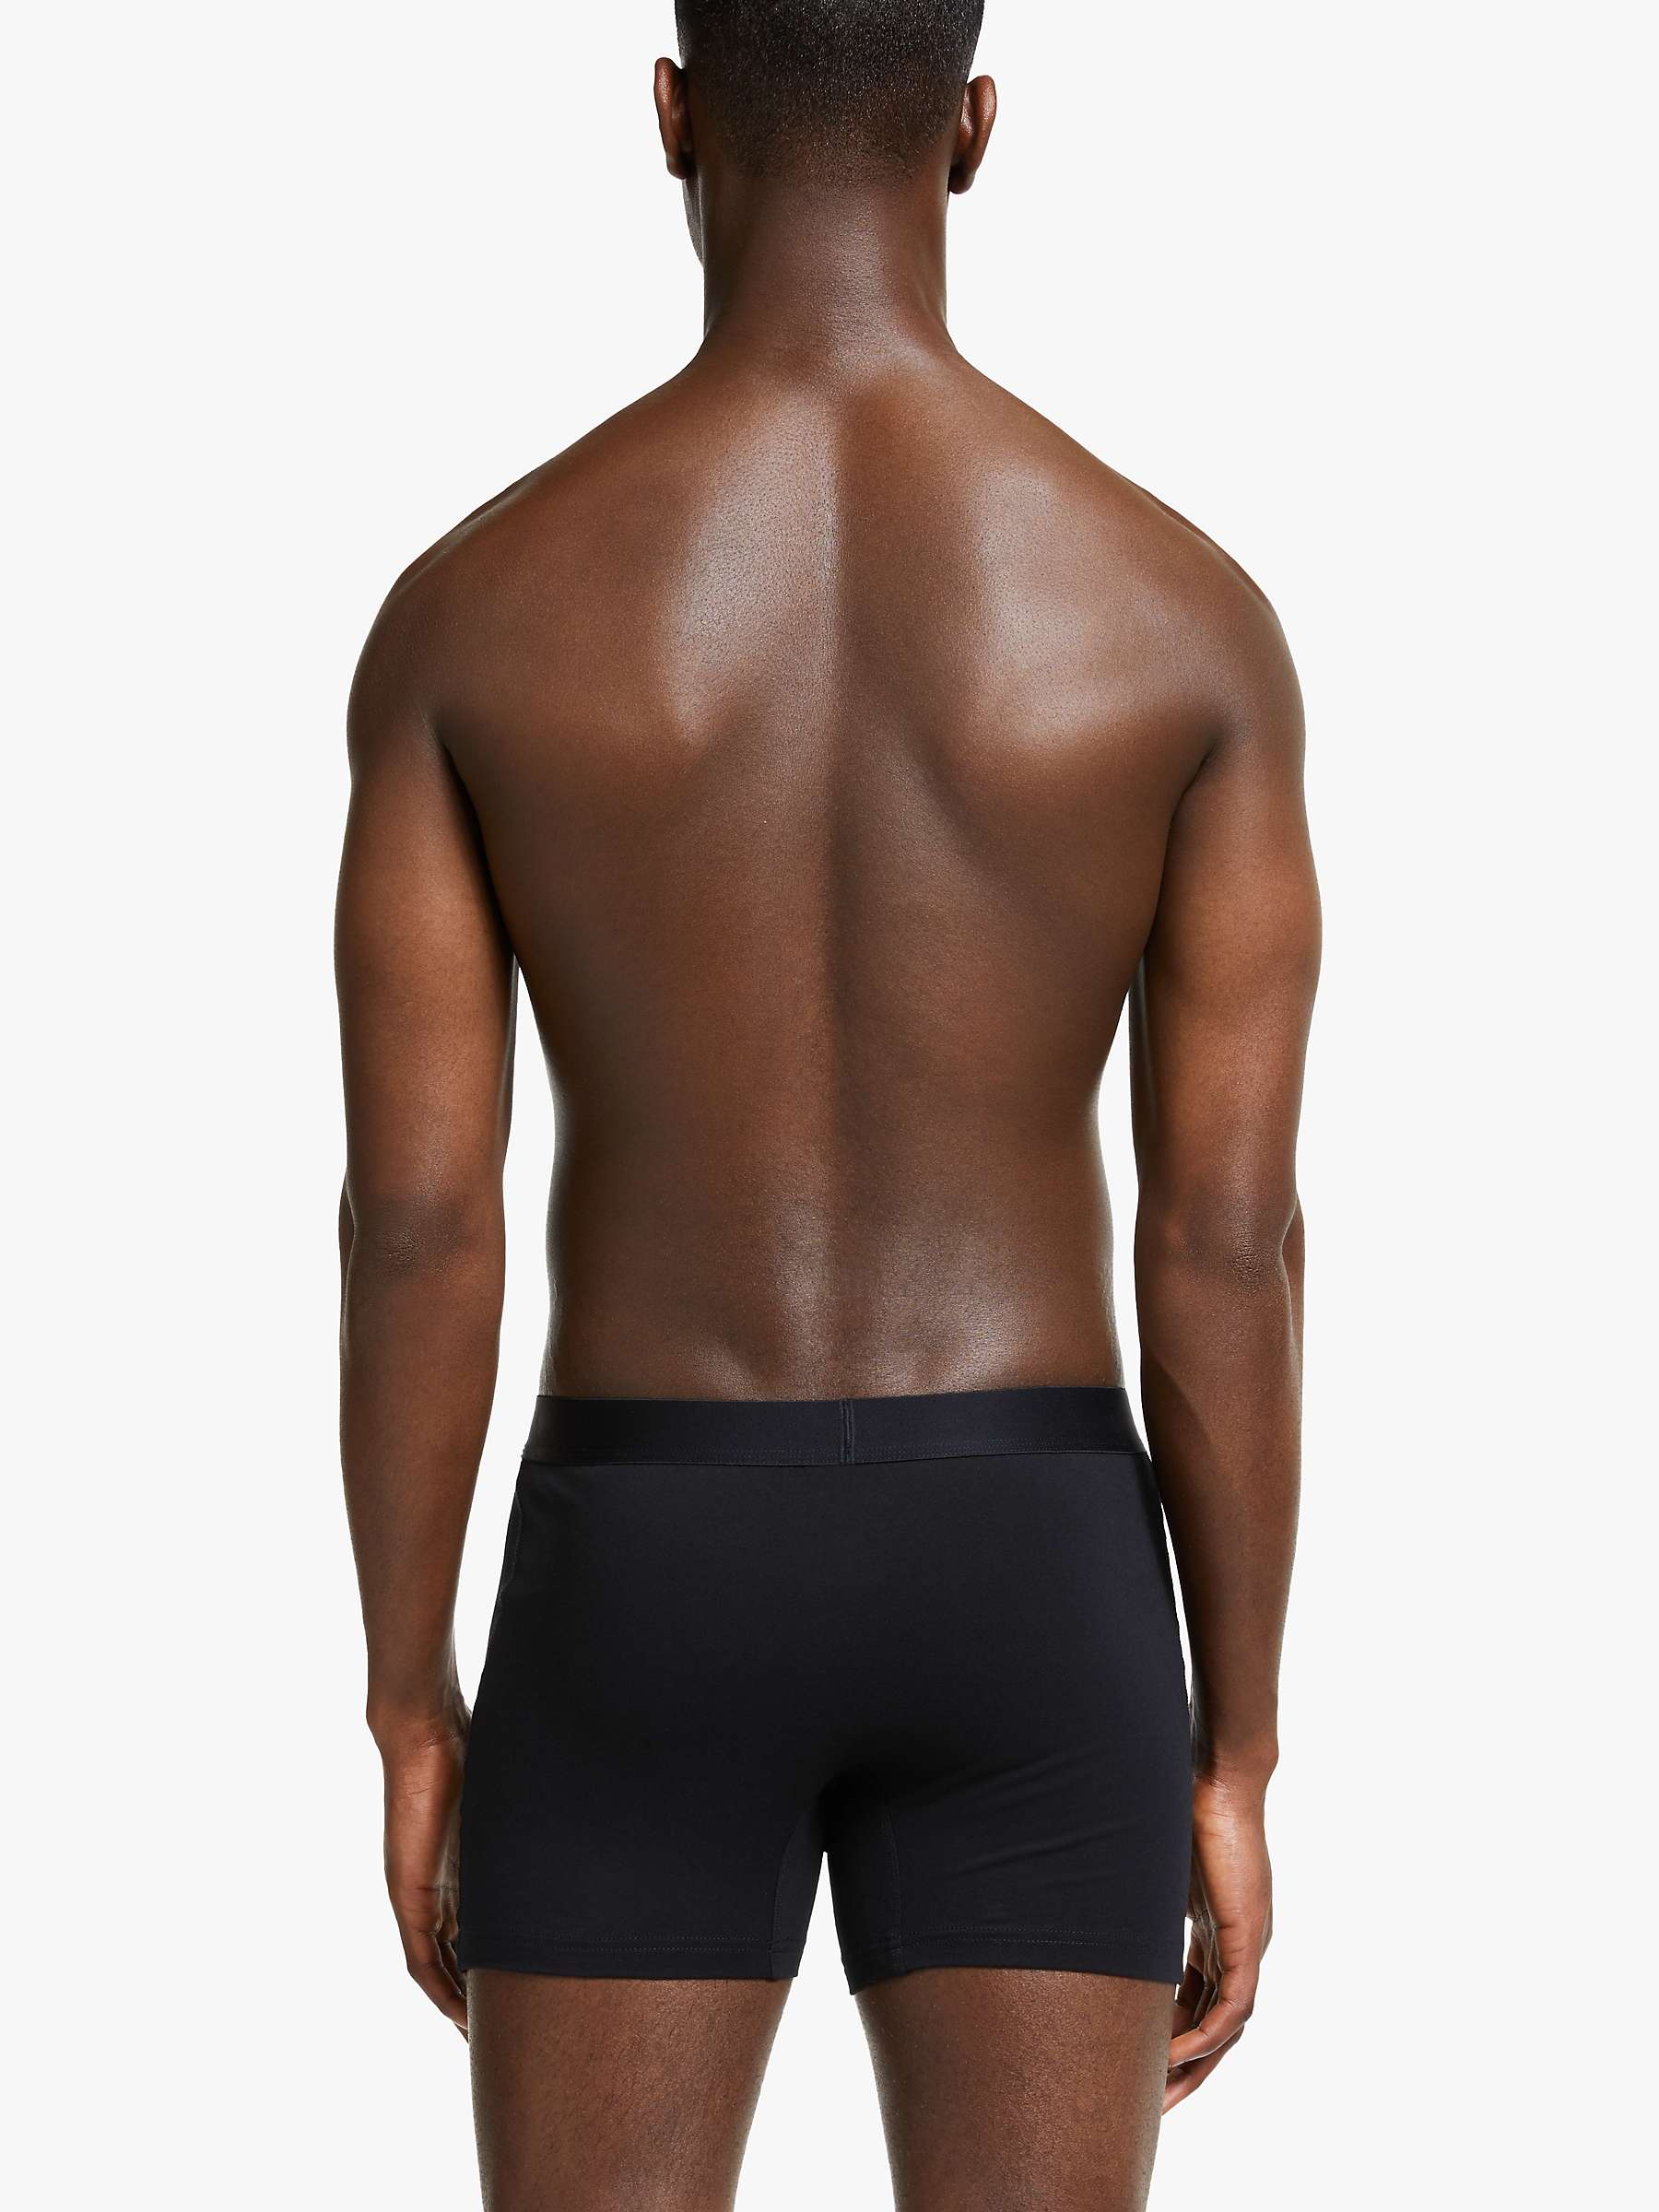 Buy John Lewis Organic Cotton Button Fly Trunks, Pack of 3, Black Online at johnlewis.com